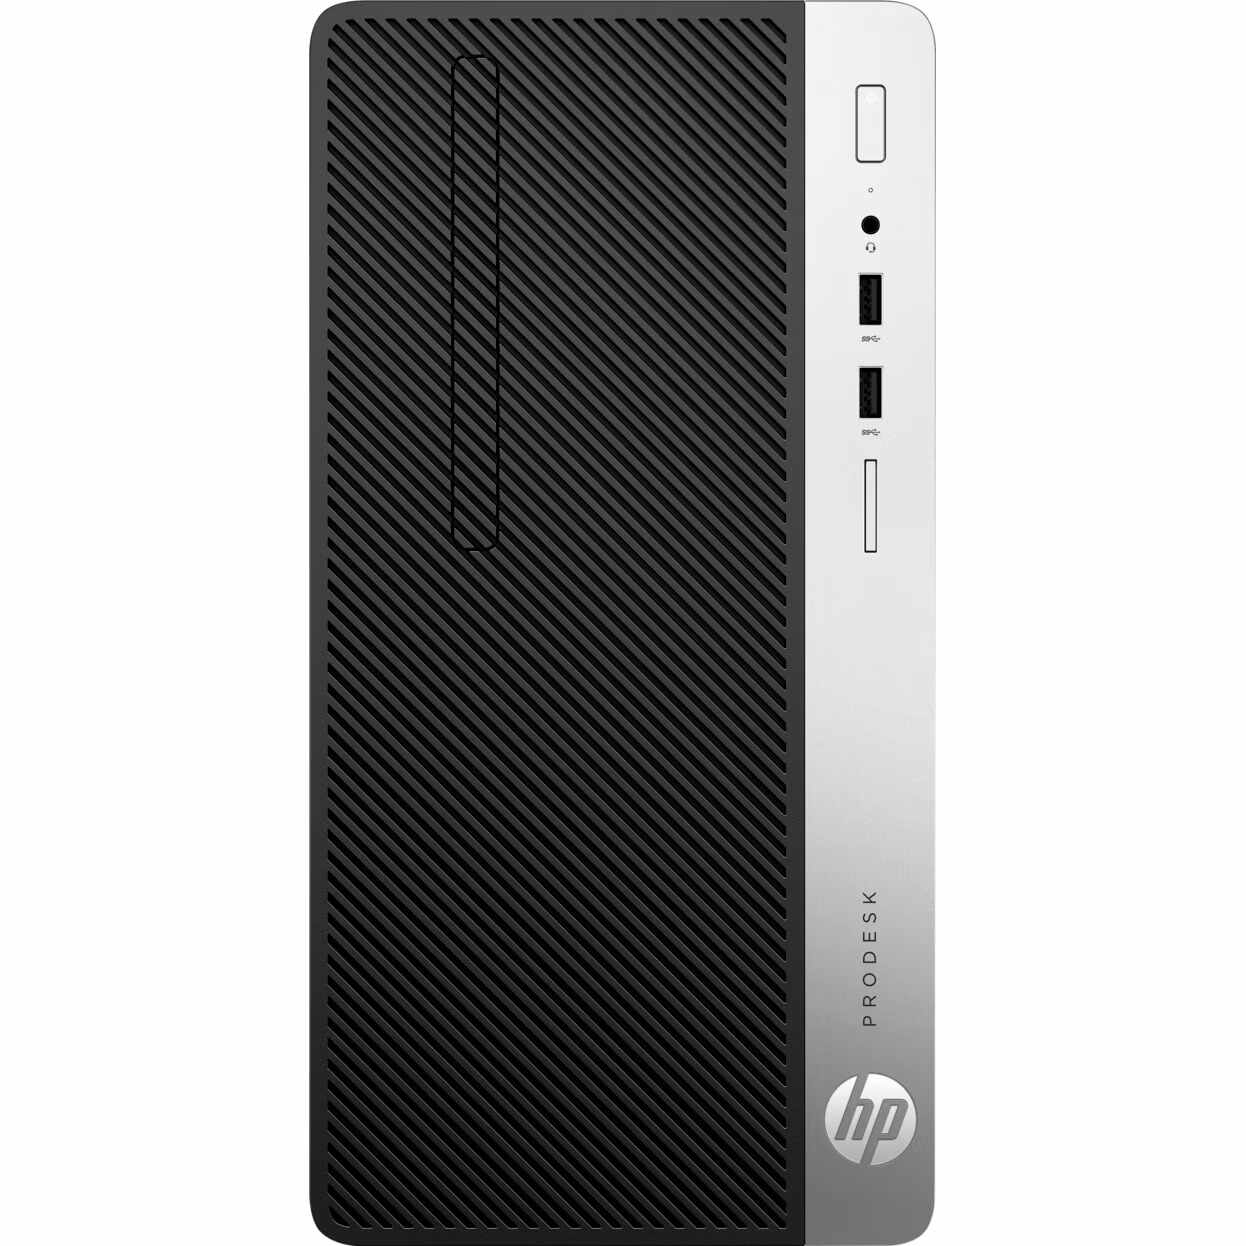 Calculator Second Hand HP ProDesk 400 G5 Tower, Intel Core i5-8500 3.00GHz, 8GB DDR4, 256GB SSD